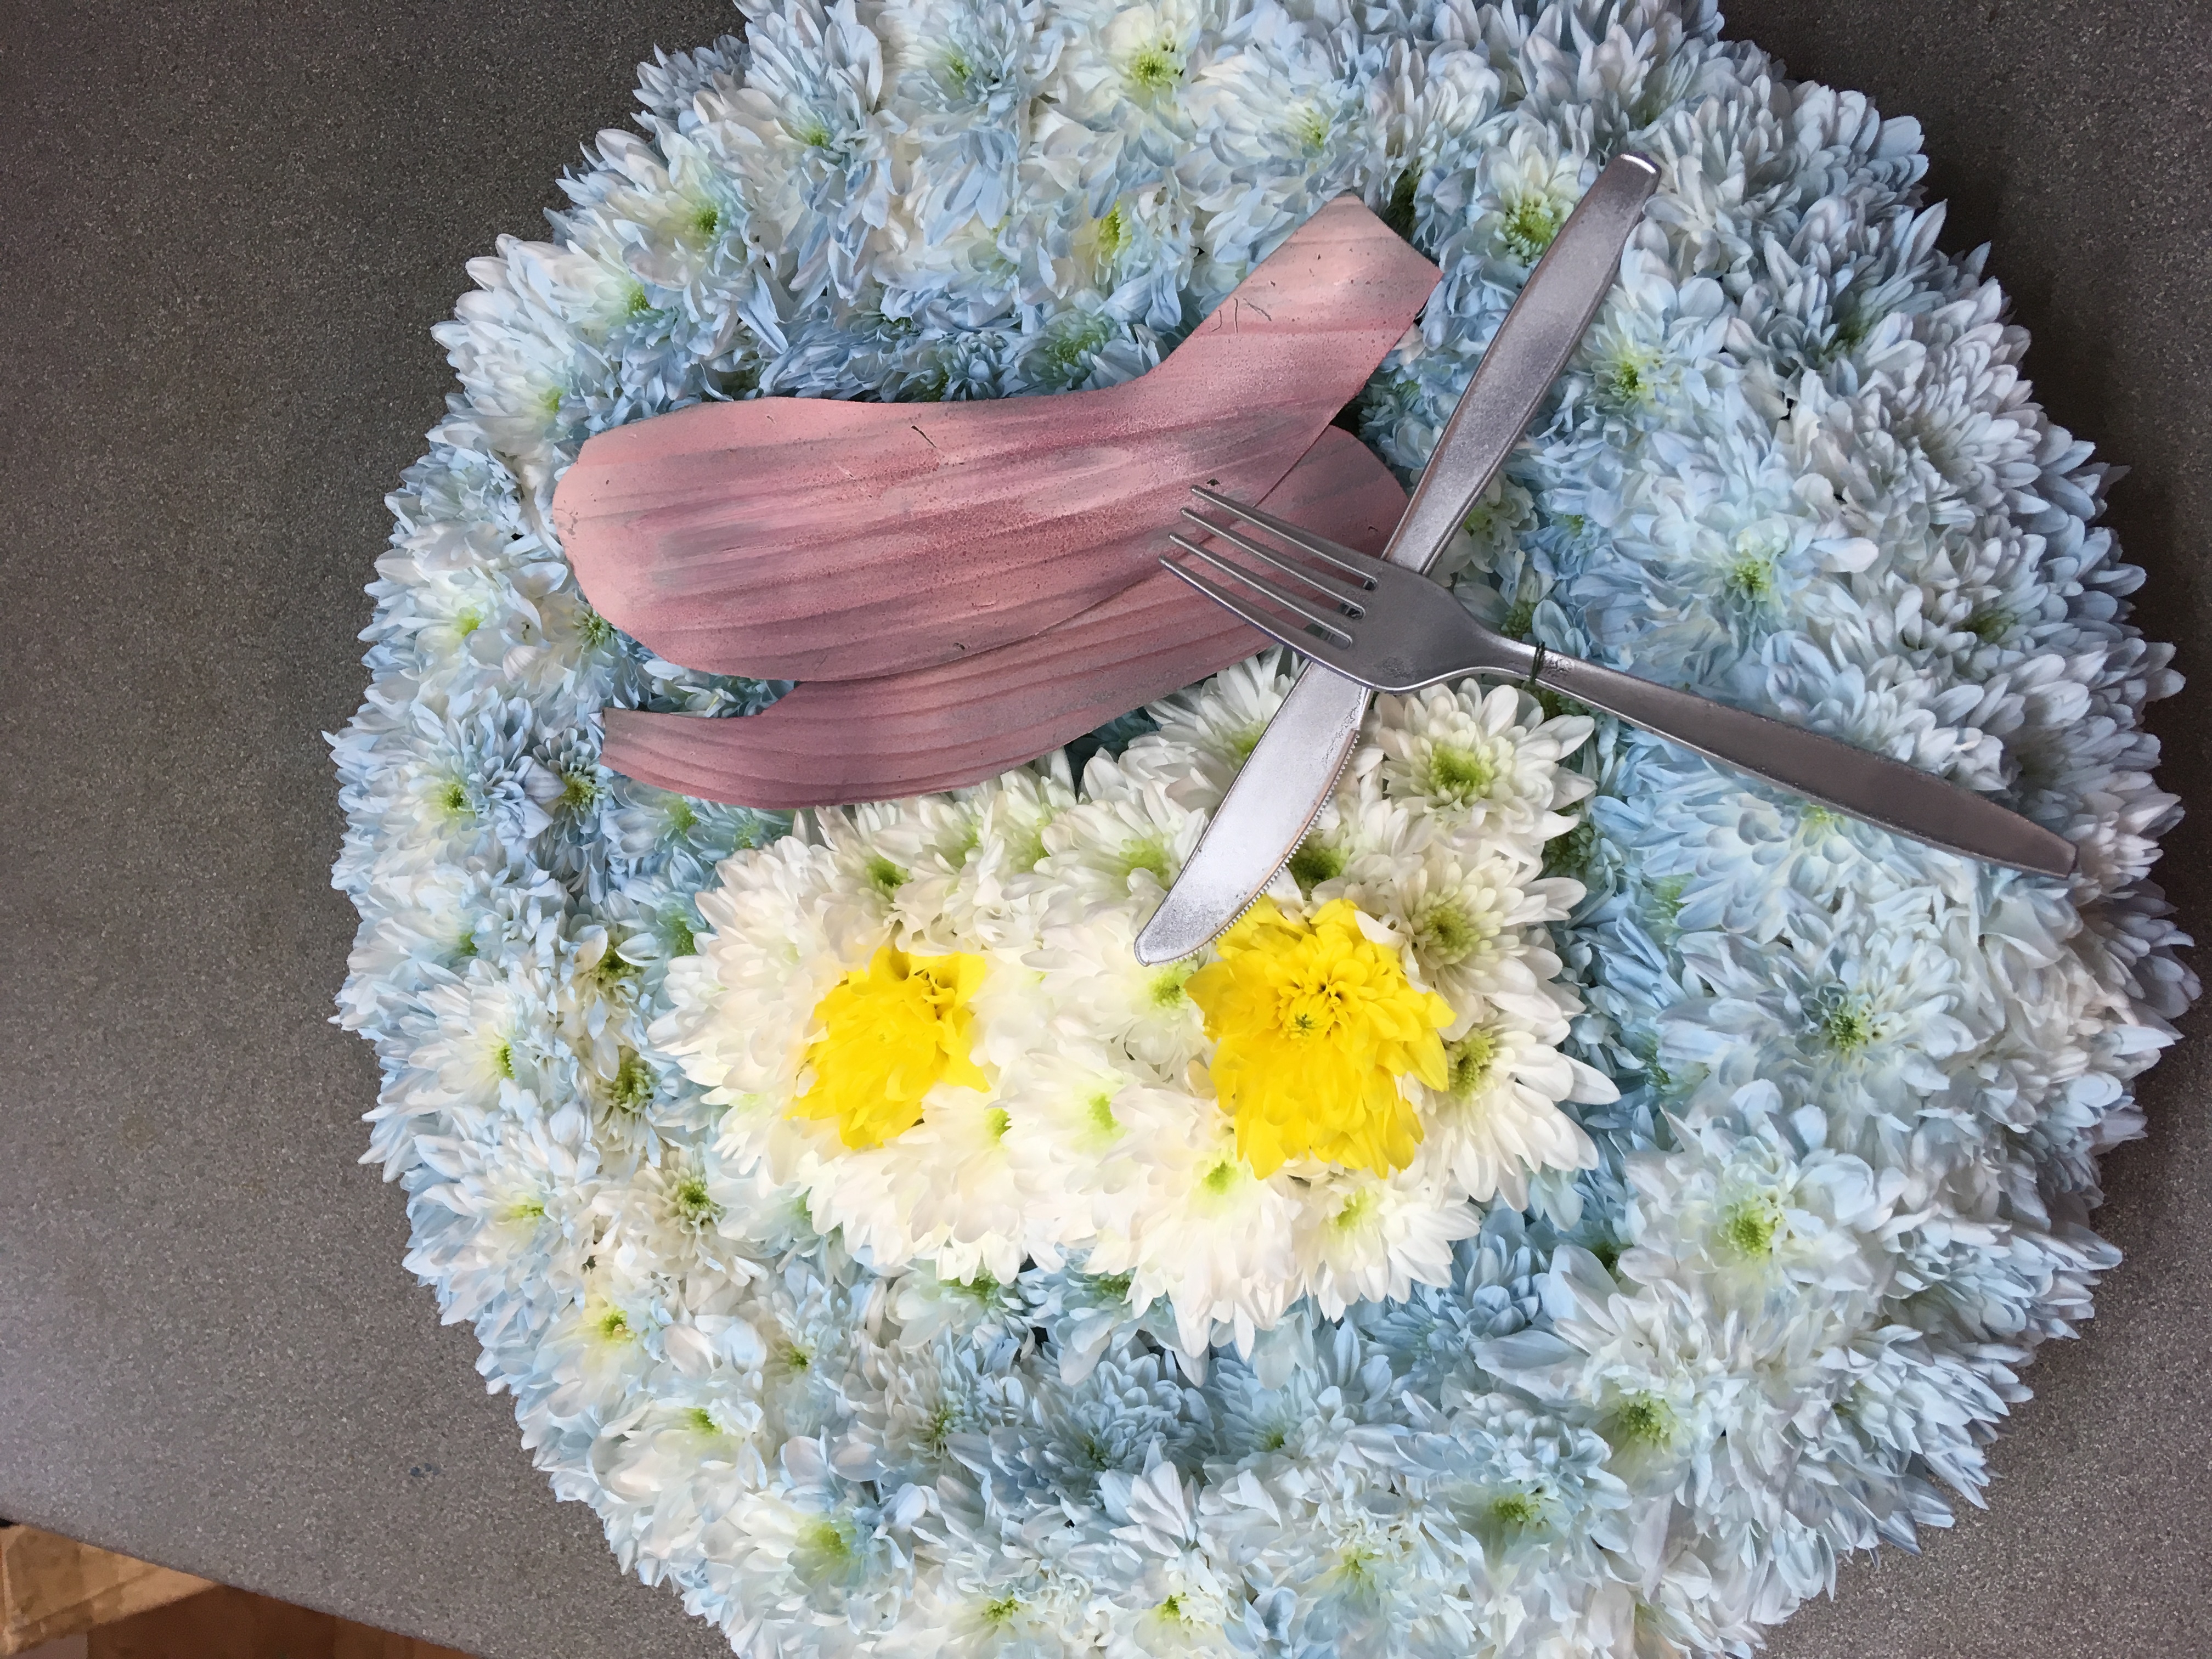 Egg& Bacon made from flowers